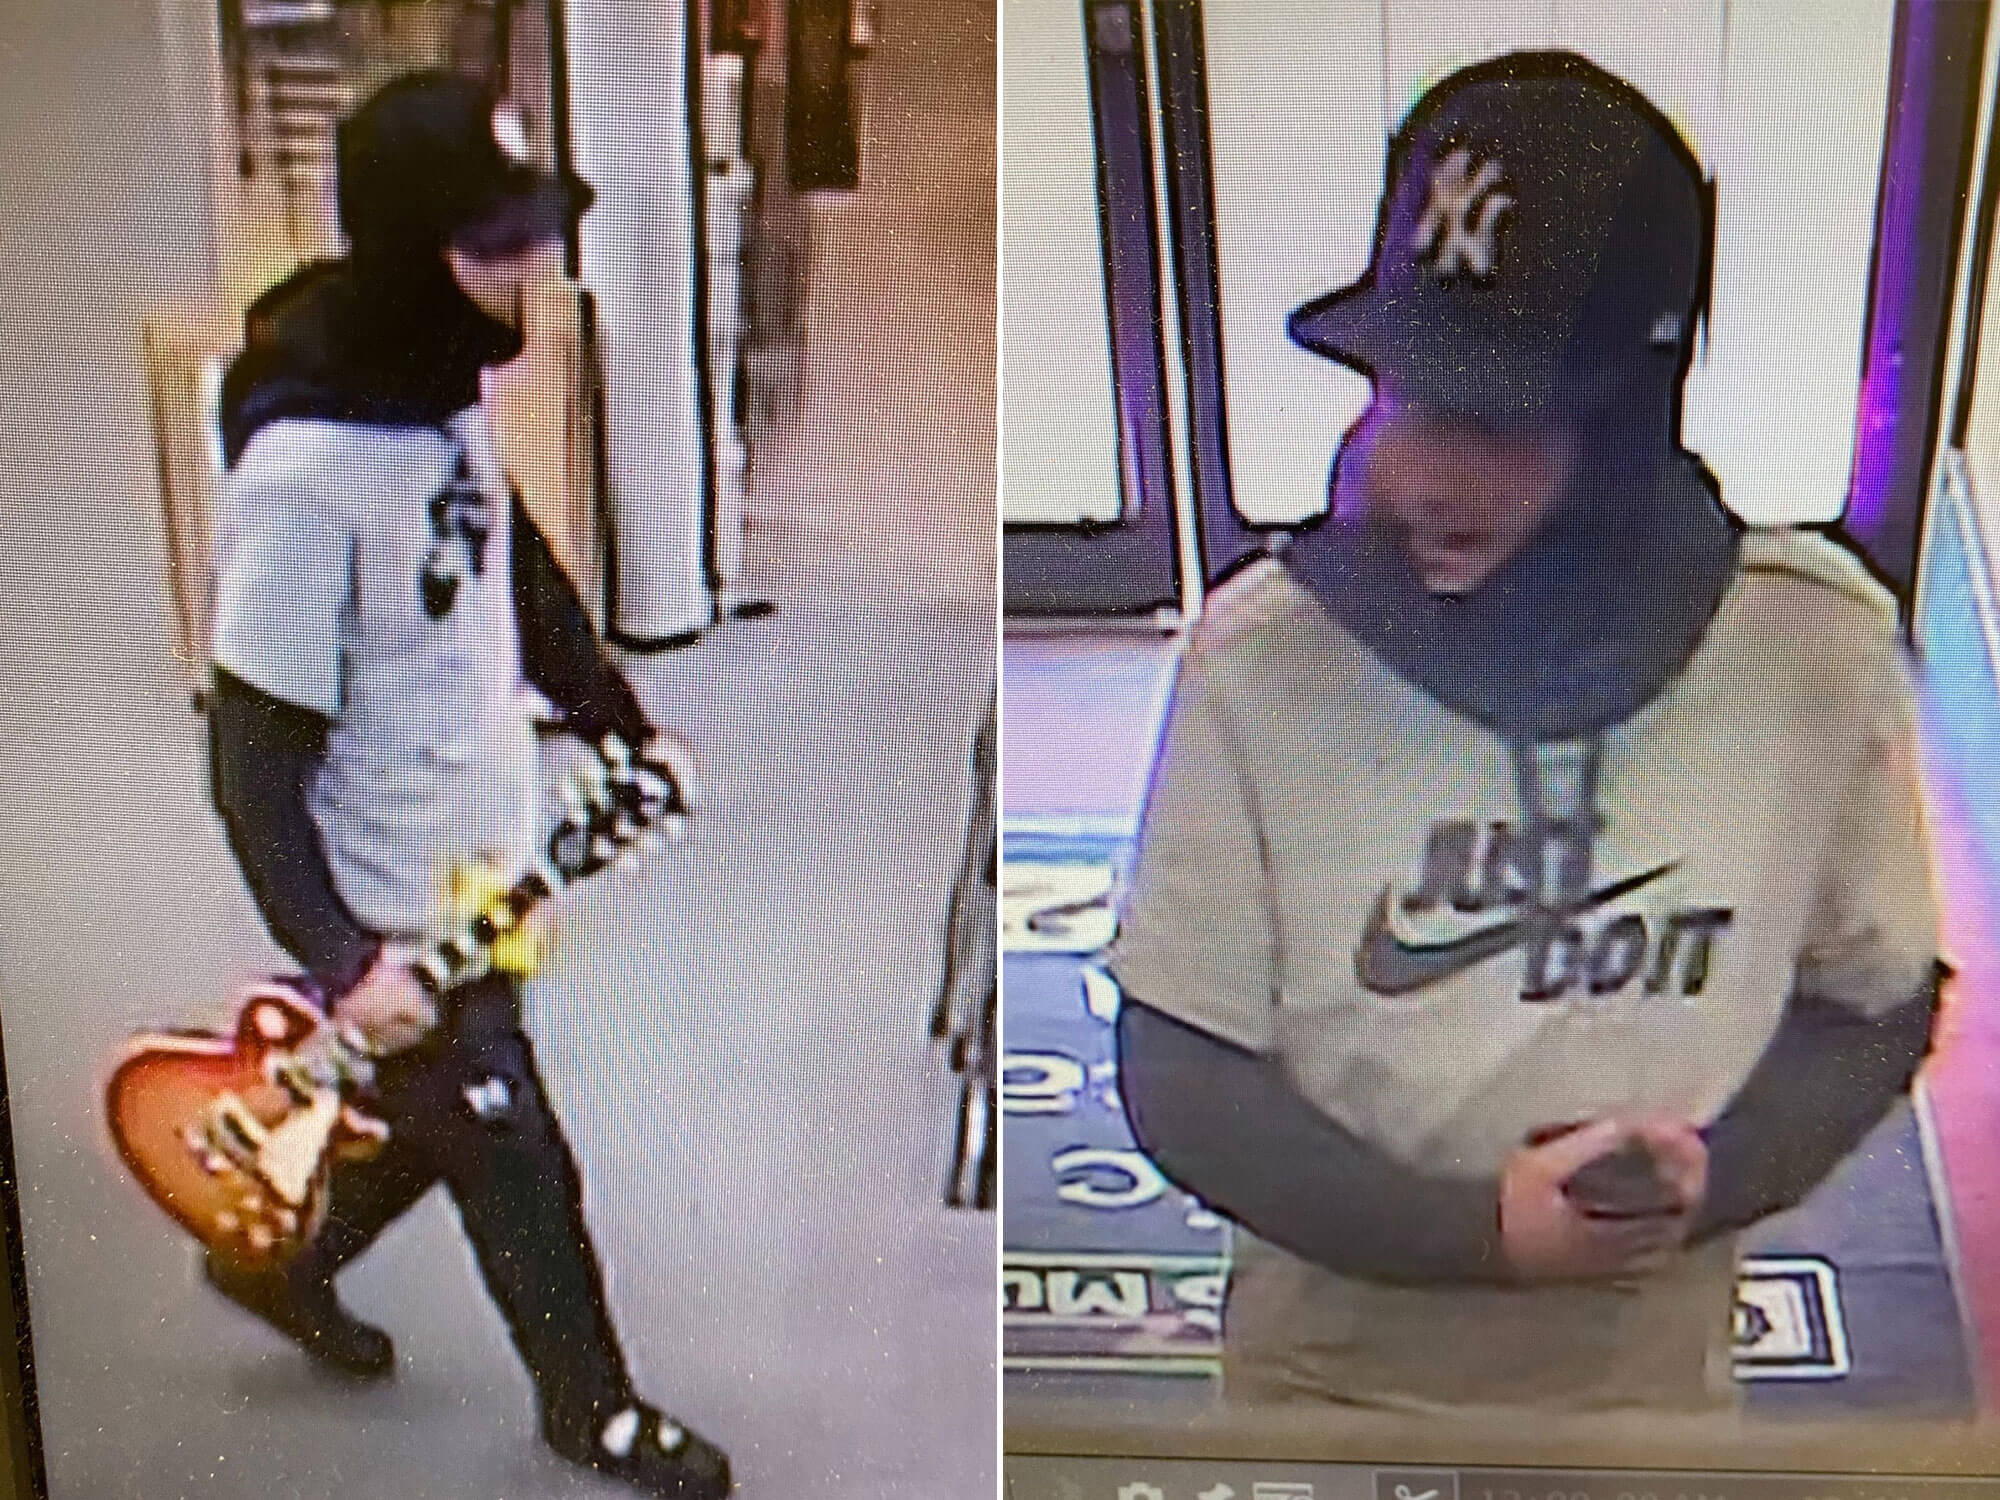 CCTV showing a man stealing a Gibson Les Paul from a guitar store